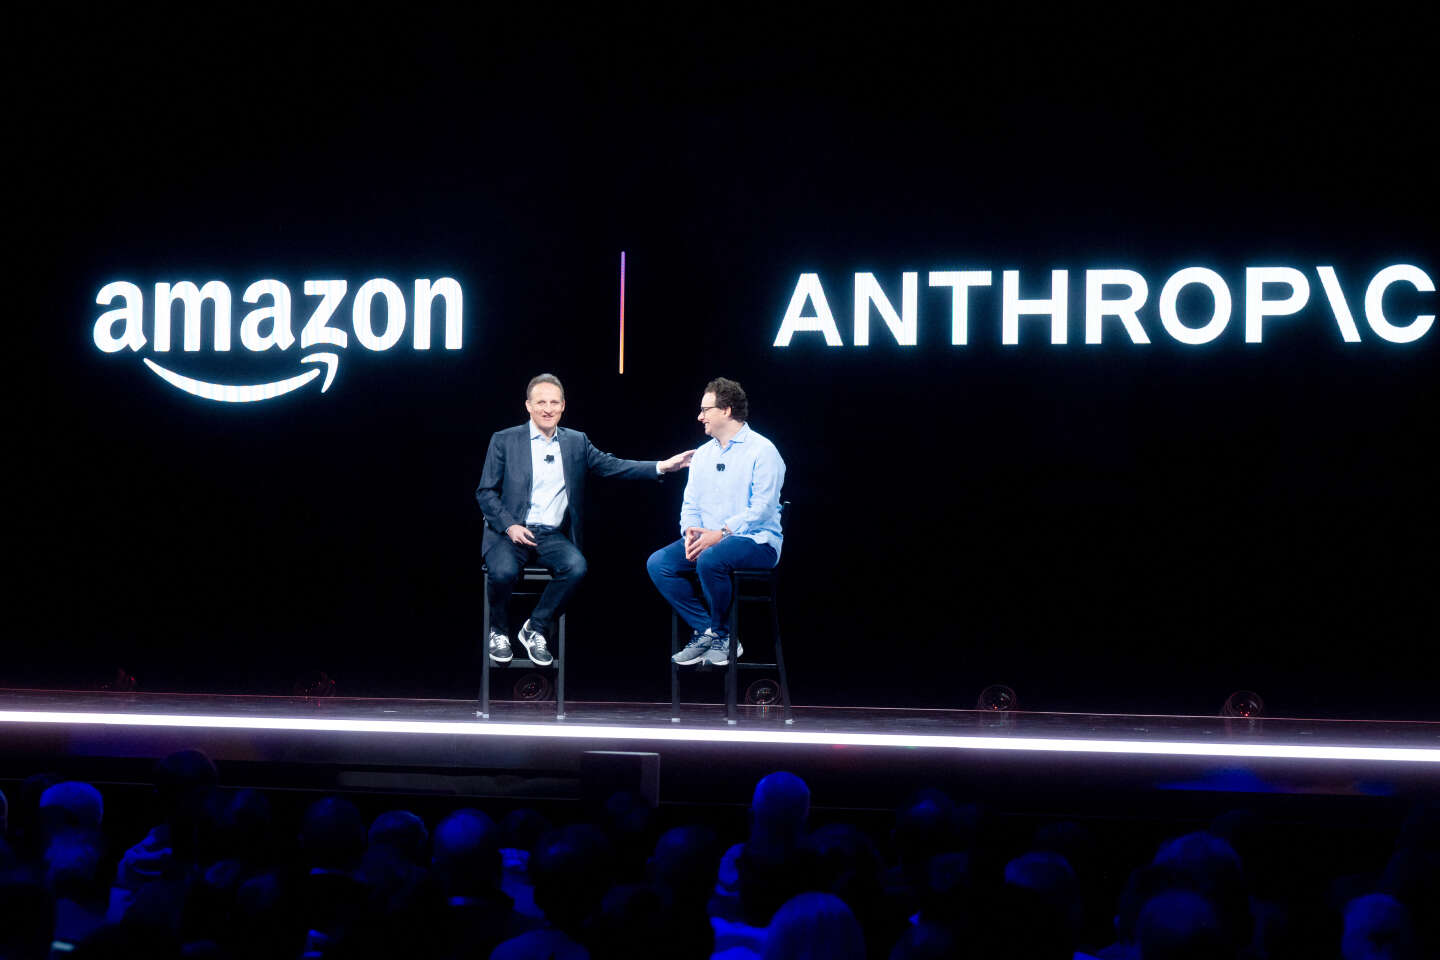 Artificial intelligence: 'The strange symbiosis between Amazon and Anthropic'